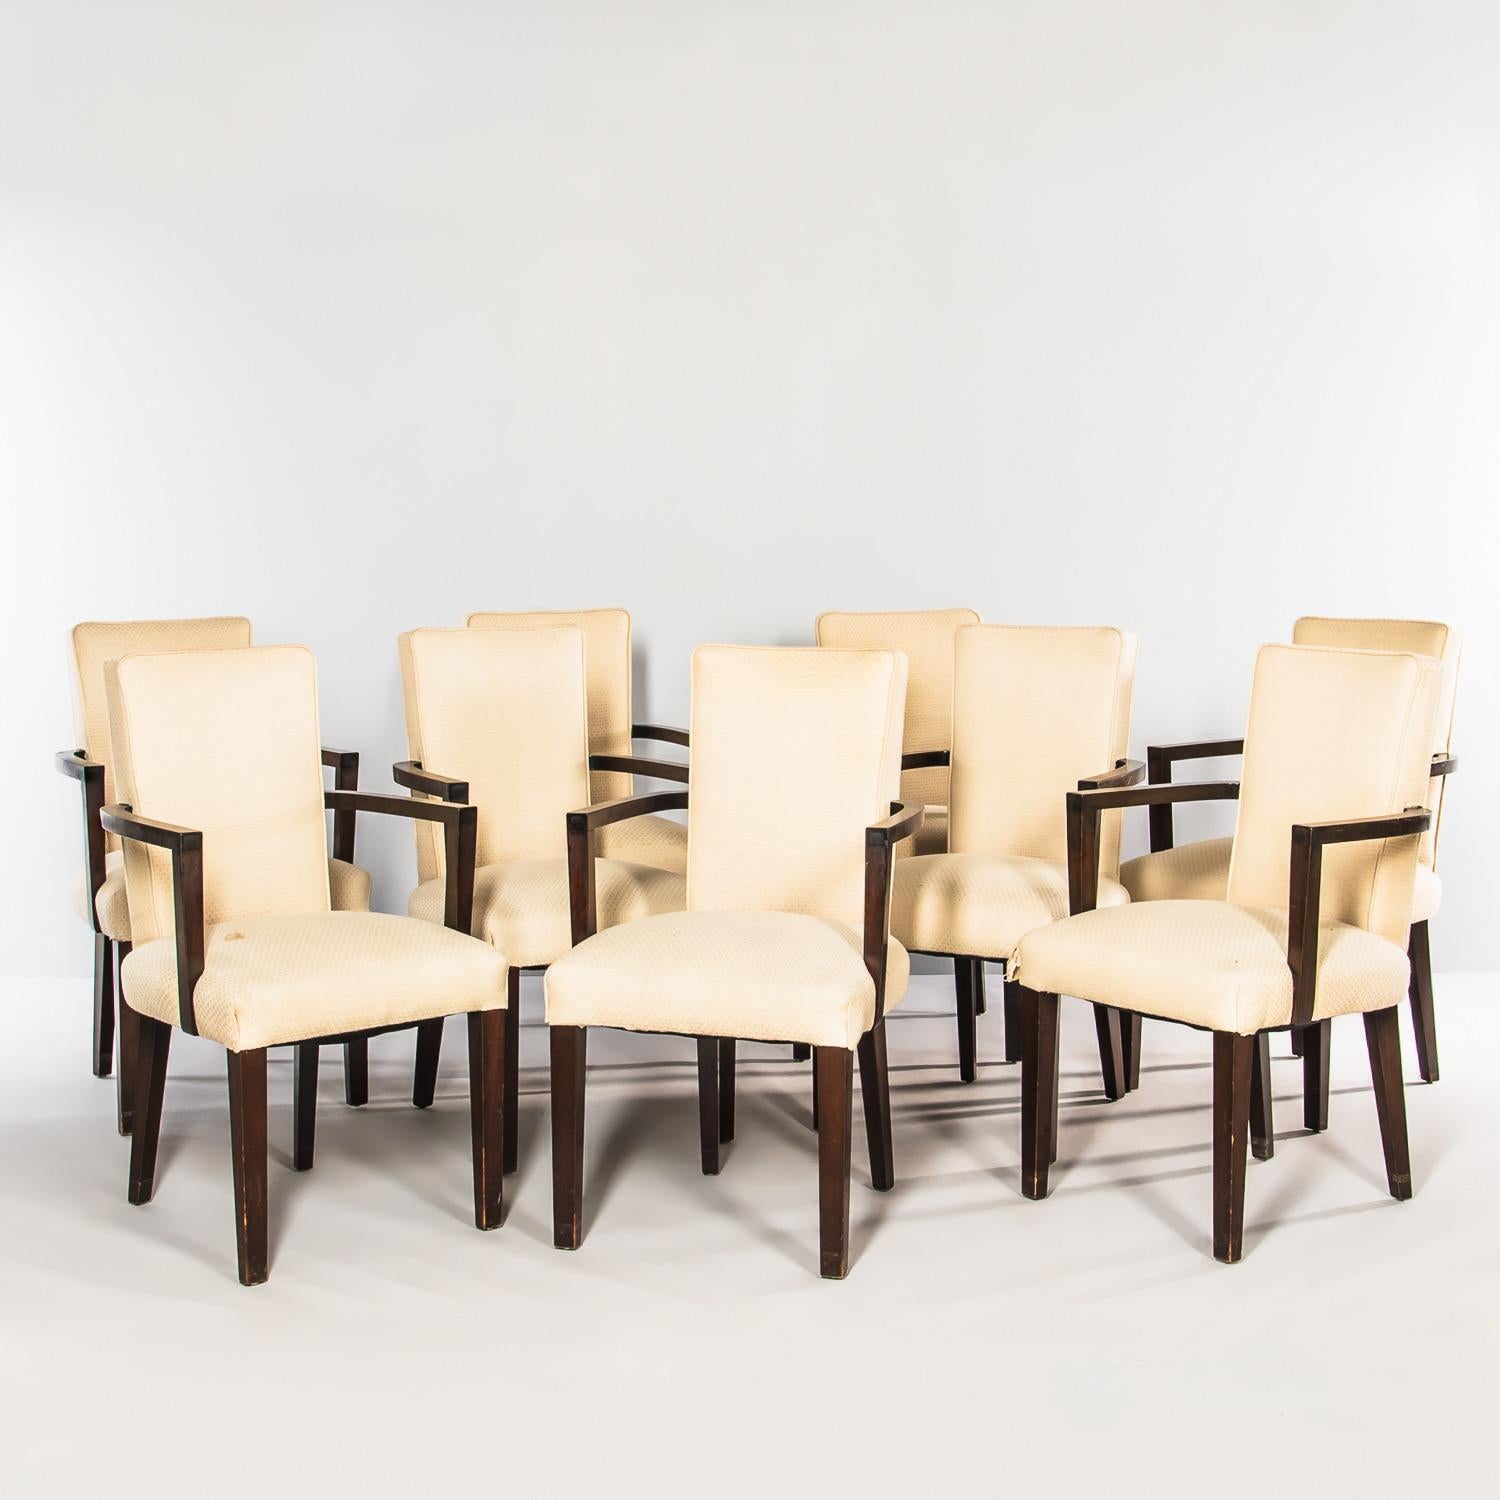 Set of ten American art deco mahogany dining chairs with streamline curved arms designed in 1938/1939 by Archibald Taylor A.I.D. for the Nob Hill residence of Mr. and Mrs. Robert H. Scanlon, San Francisco. 
The eleven room modernist apartment,